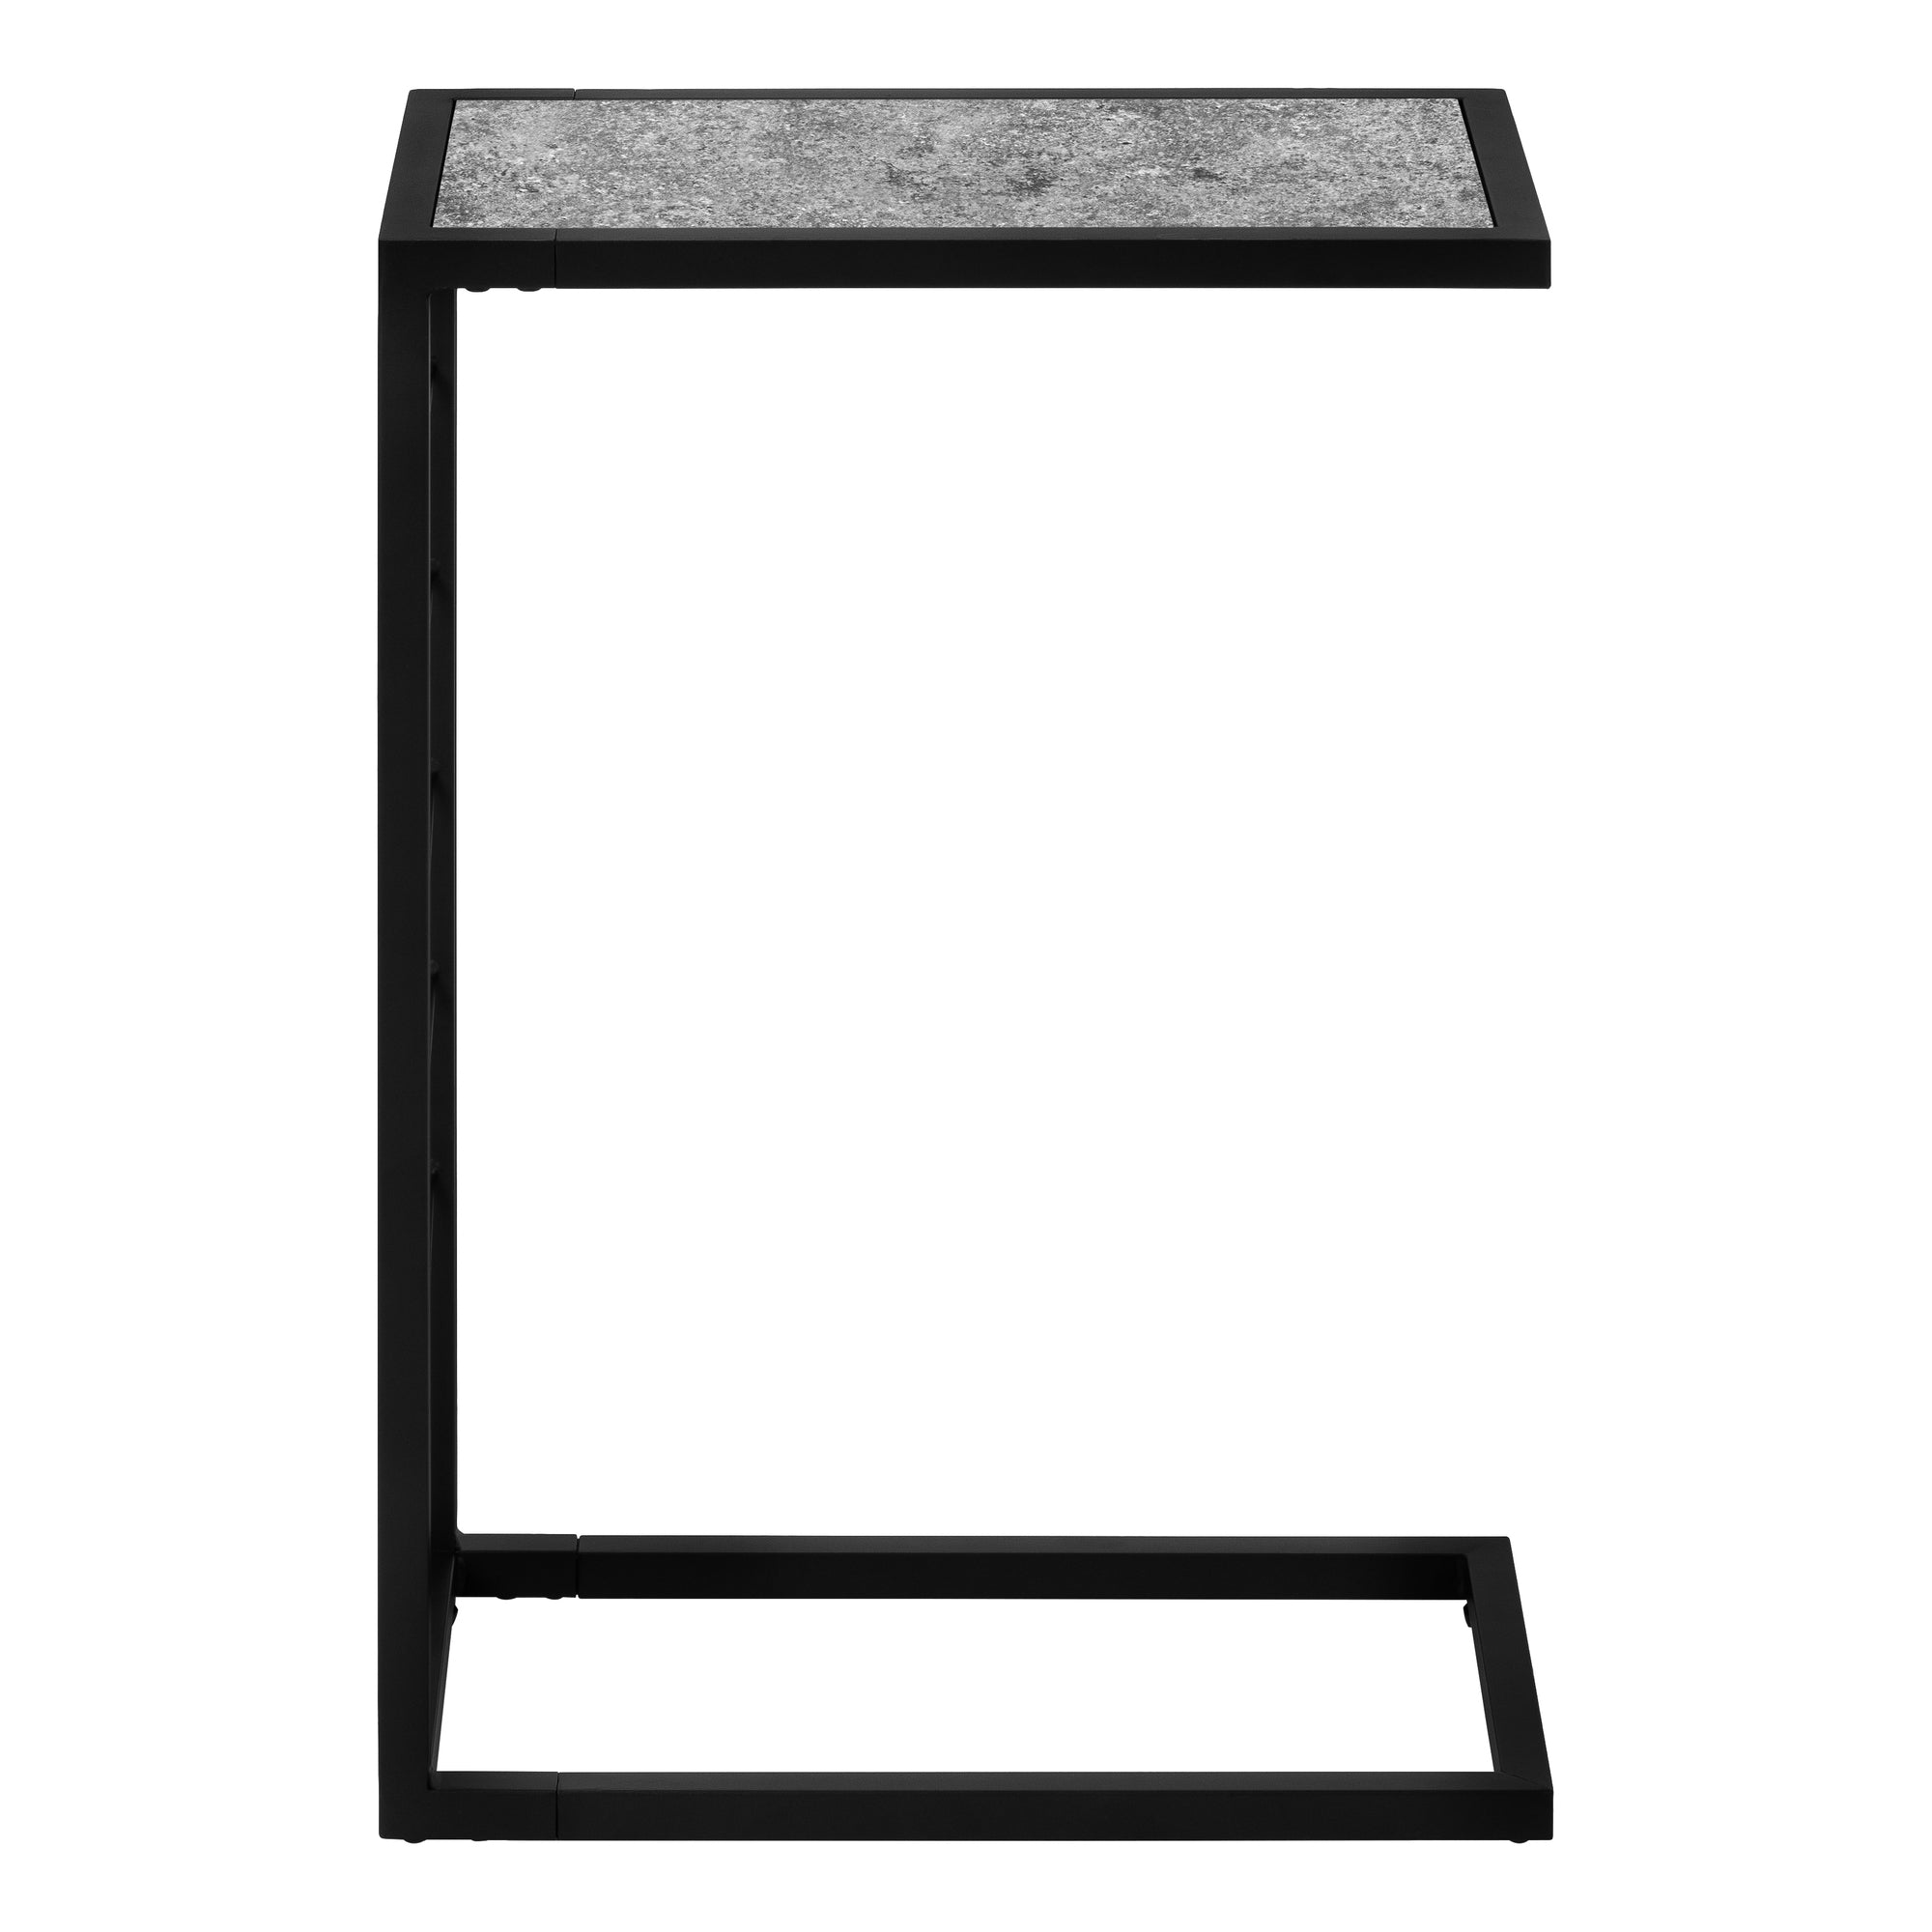 MN-213301    Accent Table, C-Shaped, End, Side, Snack, Living Room, Bedroom, Metal Frame, Laminate, Grey Stone Look, Black, Contemporary, Modern